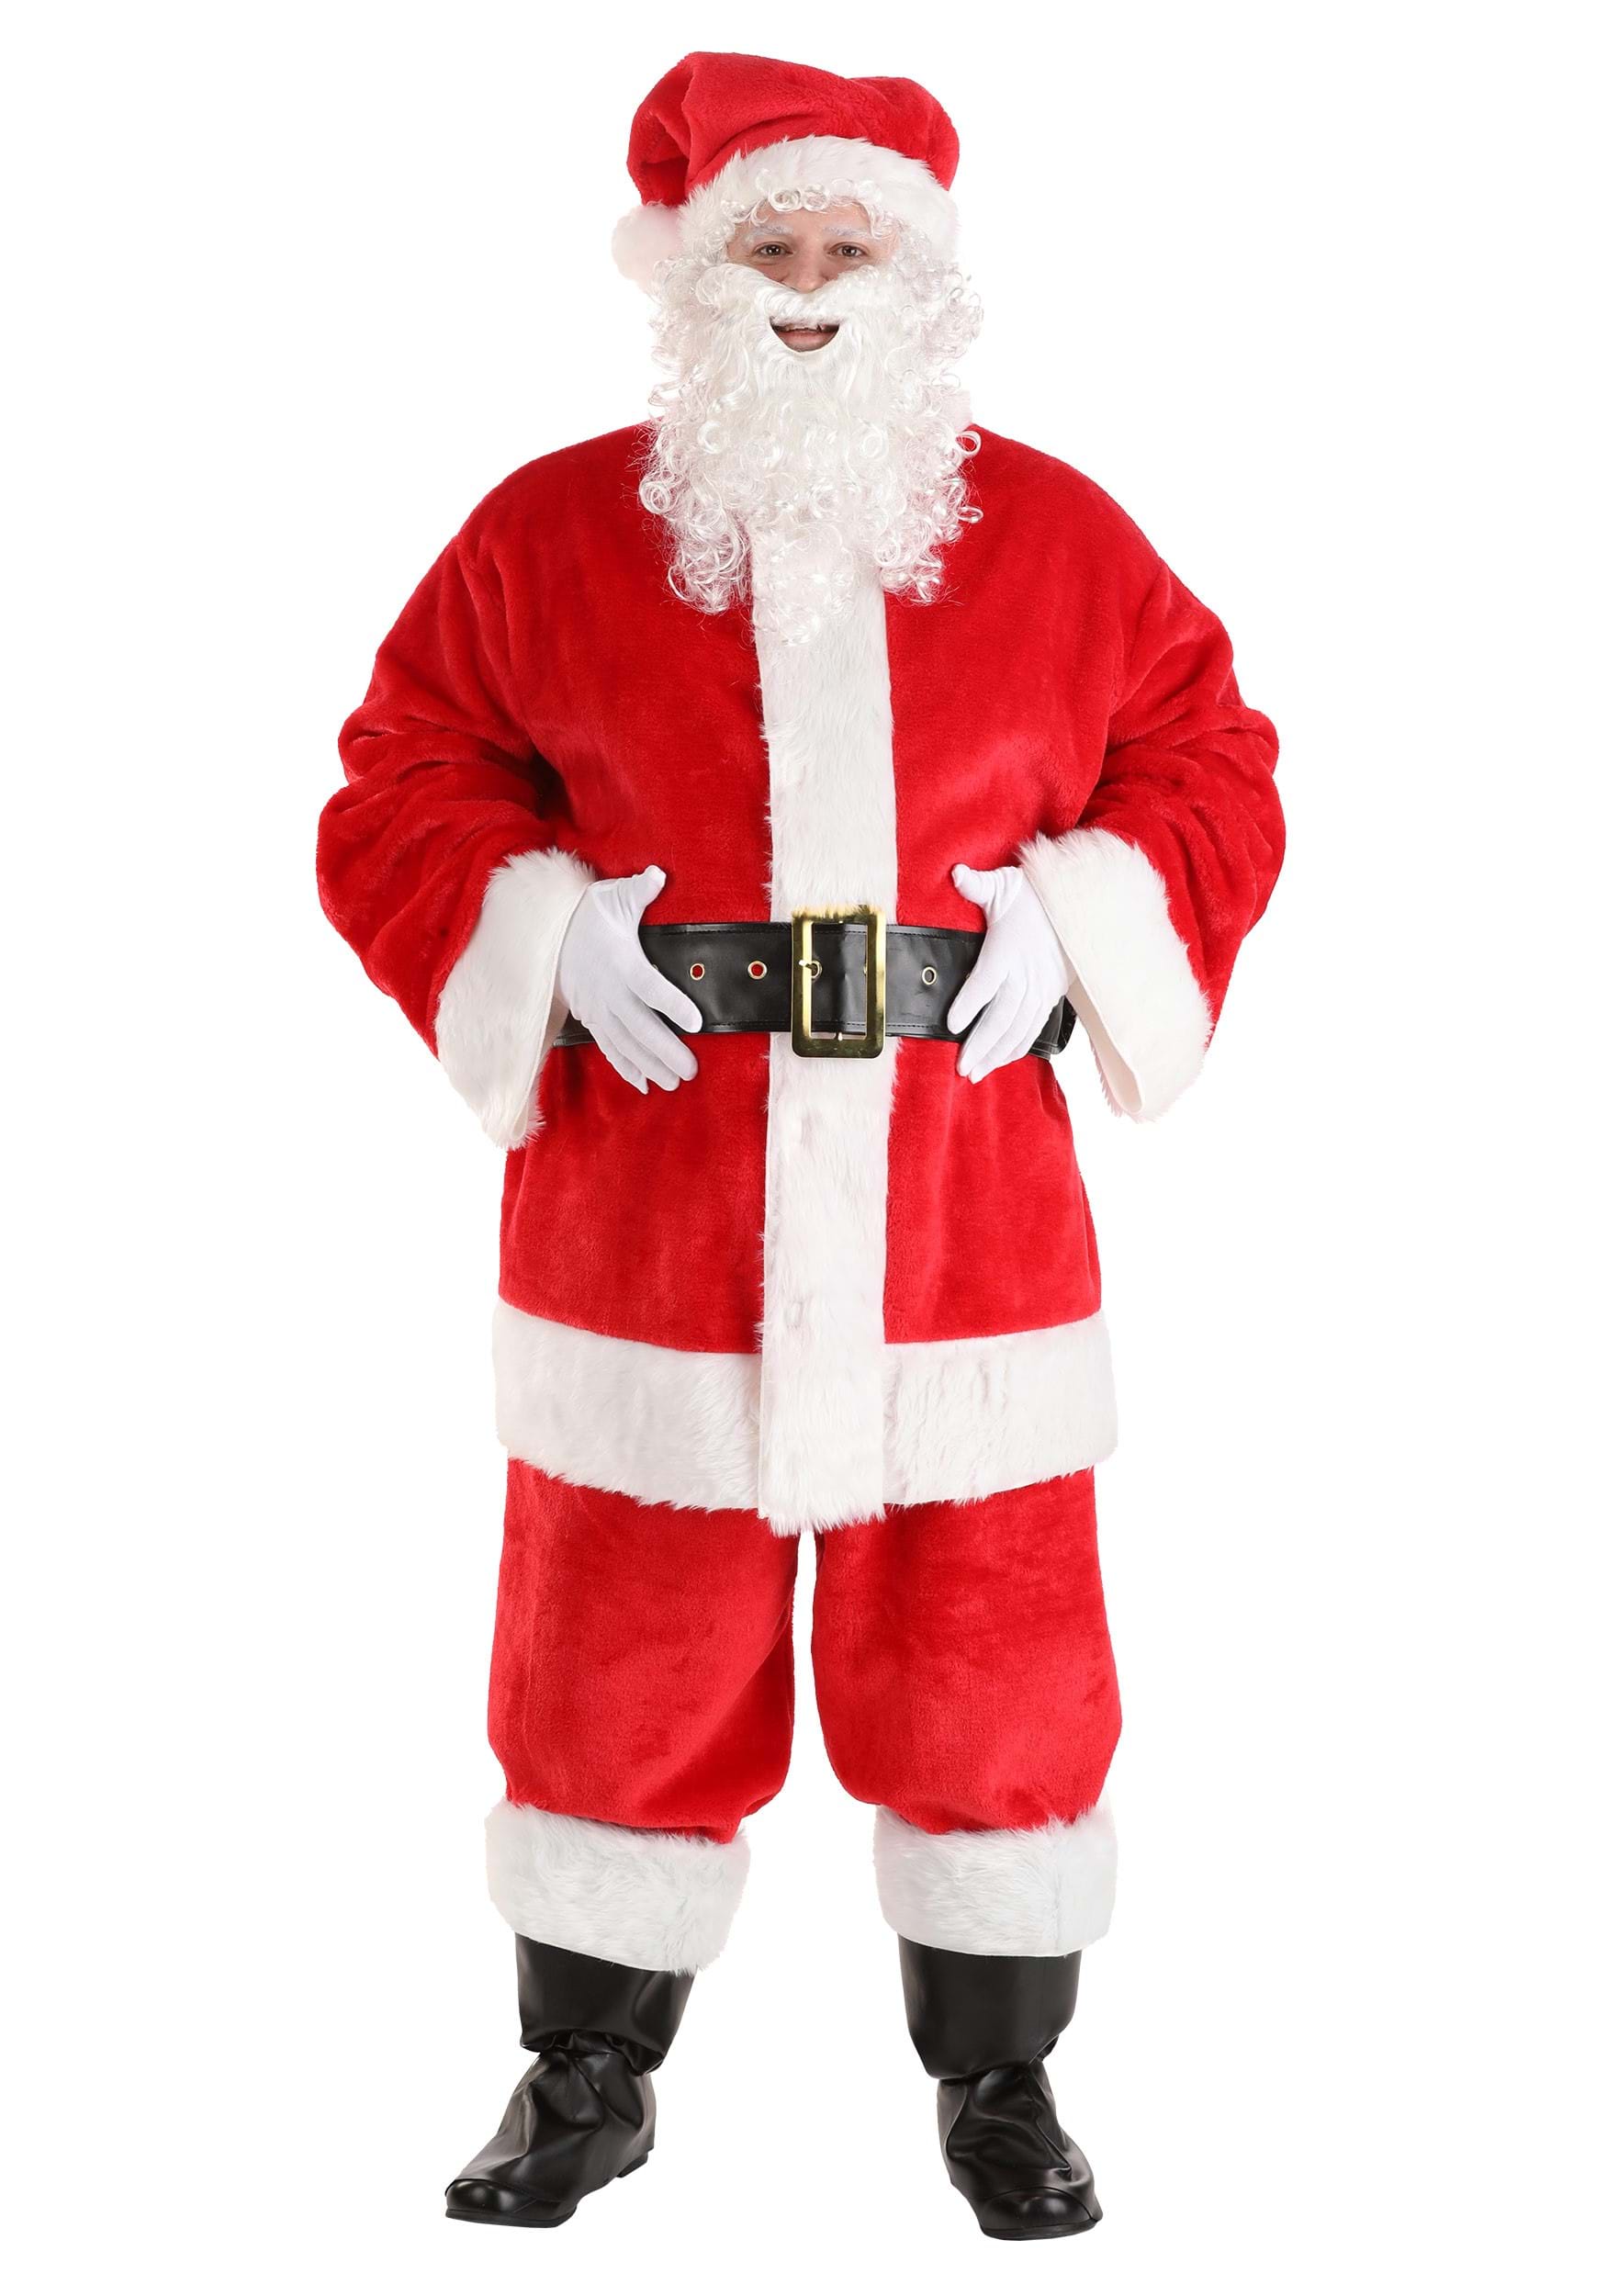 Image of Deluxe Red Santa Claus Plus Size Costume ID FUN1847PL-6X/7X